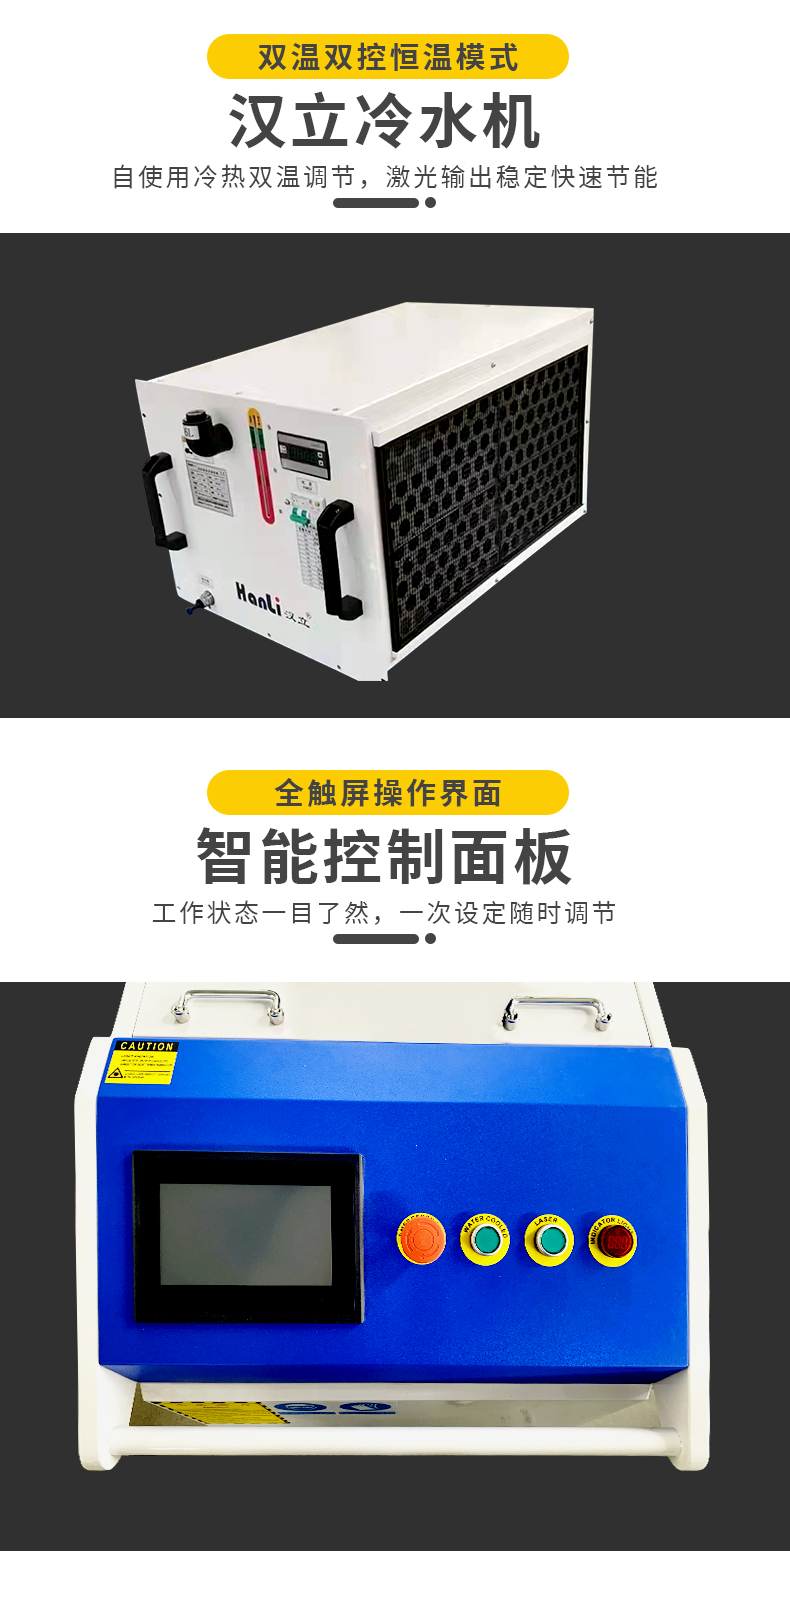 Handheld fiber laser cleaning and rust removal machine, metal surface rust removal and oxidation layer high pressure cleaning machine, high-power